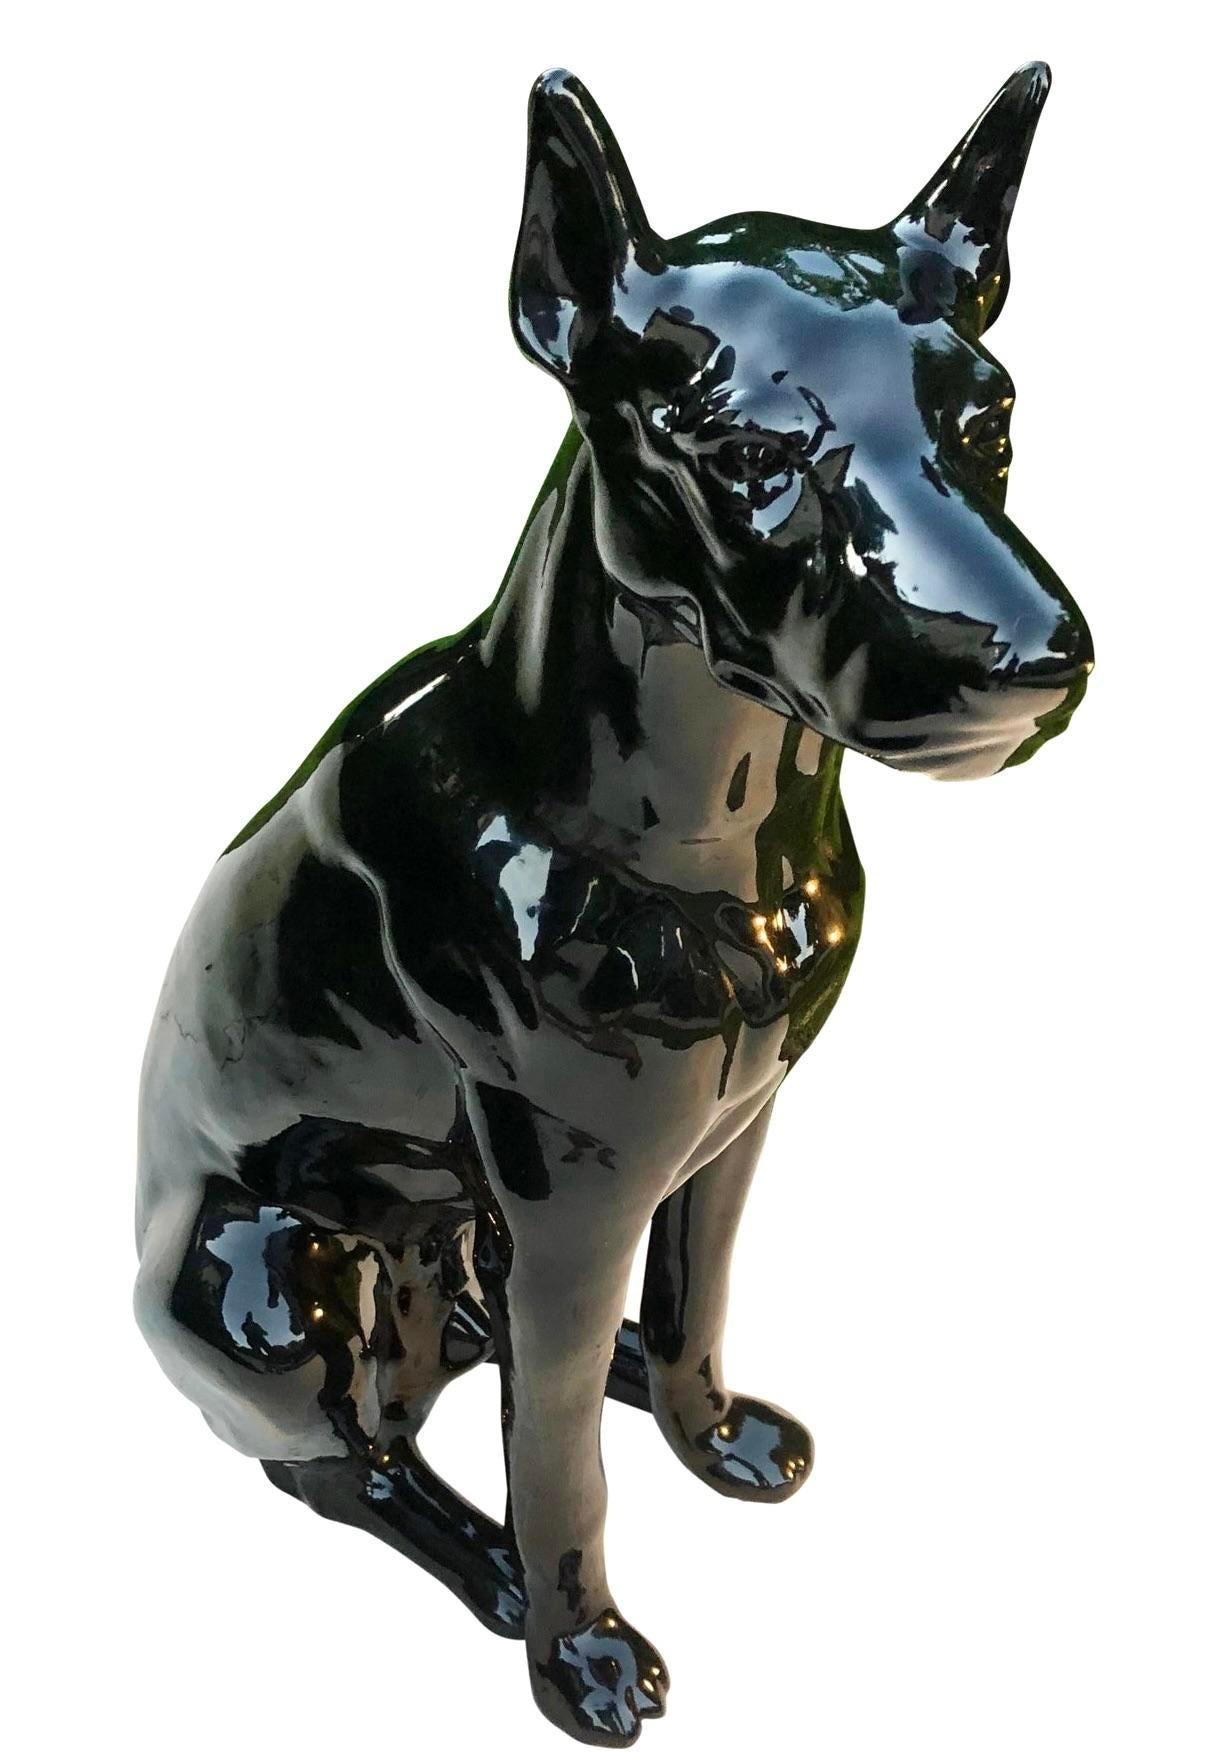 A fabulous vintage Boho dog. A chic life size glazed ceramic finish in black. A great way to add a flash of glamour to any space. Acquired from a Palm Beach estate.